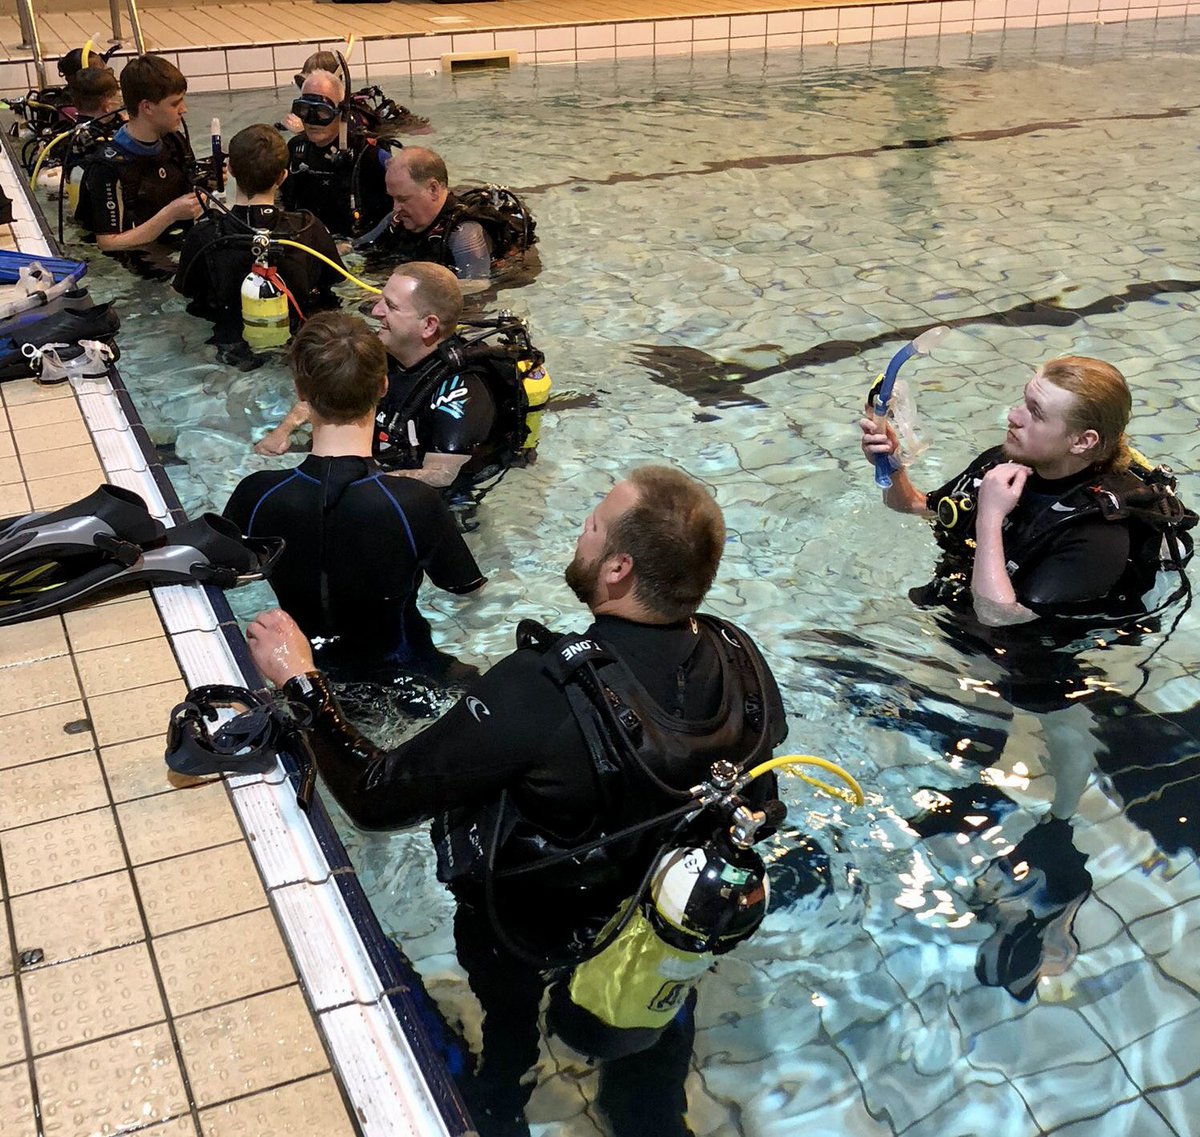 👏🌊 Huge Congratulations to the Scouts of Pyrenees Explorers! 🌟

A big shoutout to all the amazing scouts who took the plunge and completed their try dives in the pool tonight! Your enthusiasm and courage to explore the underwater world are truly inspiring. 🐠💦